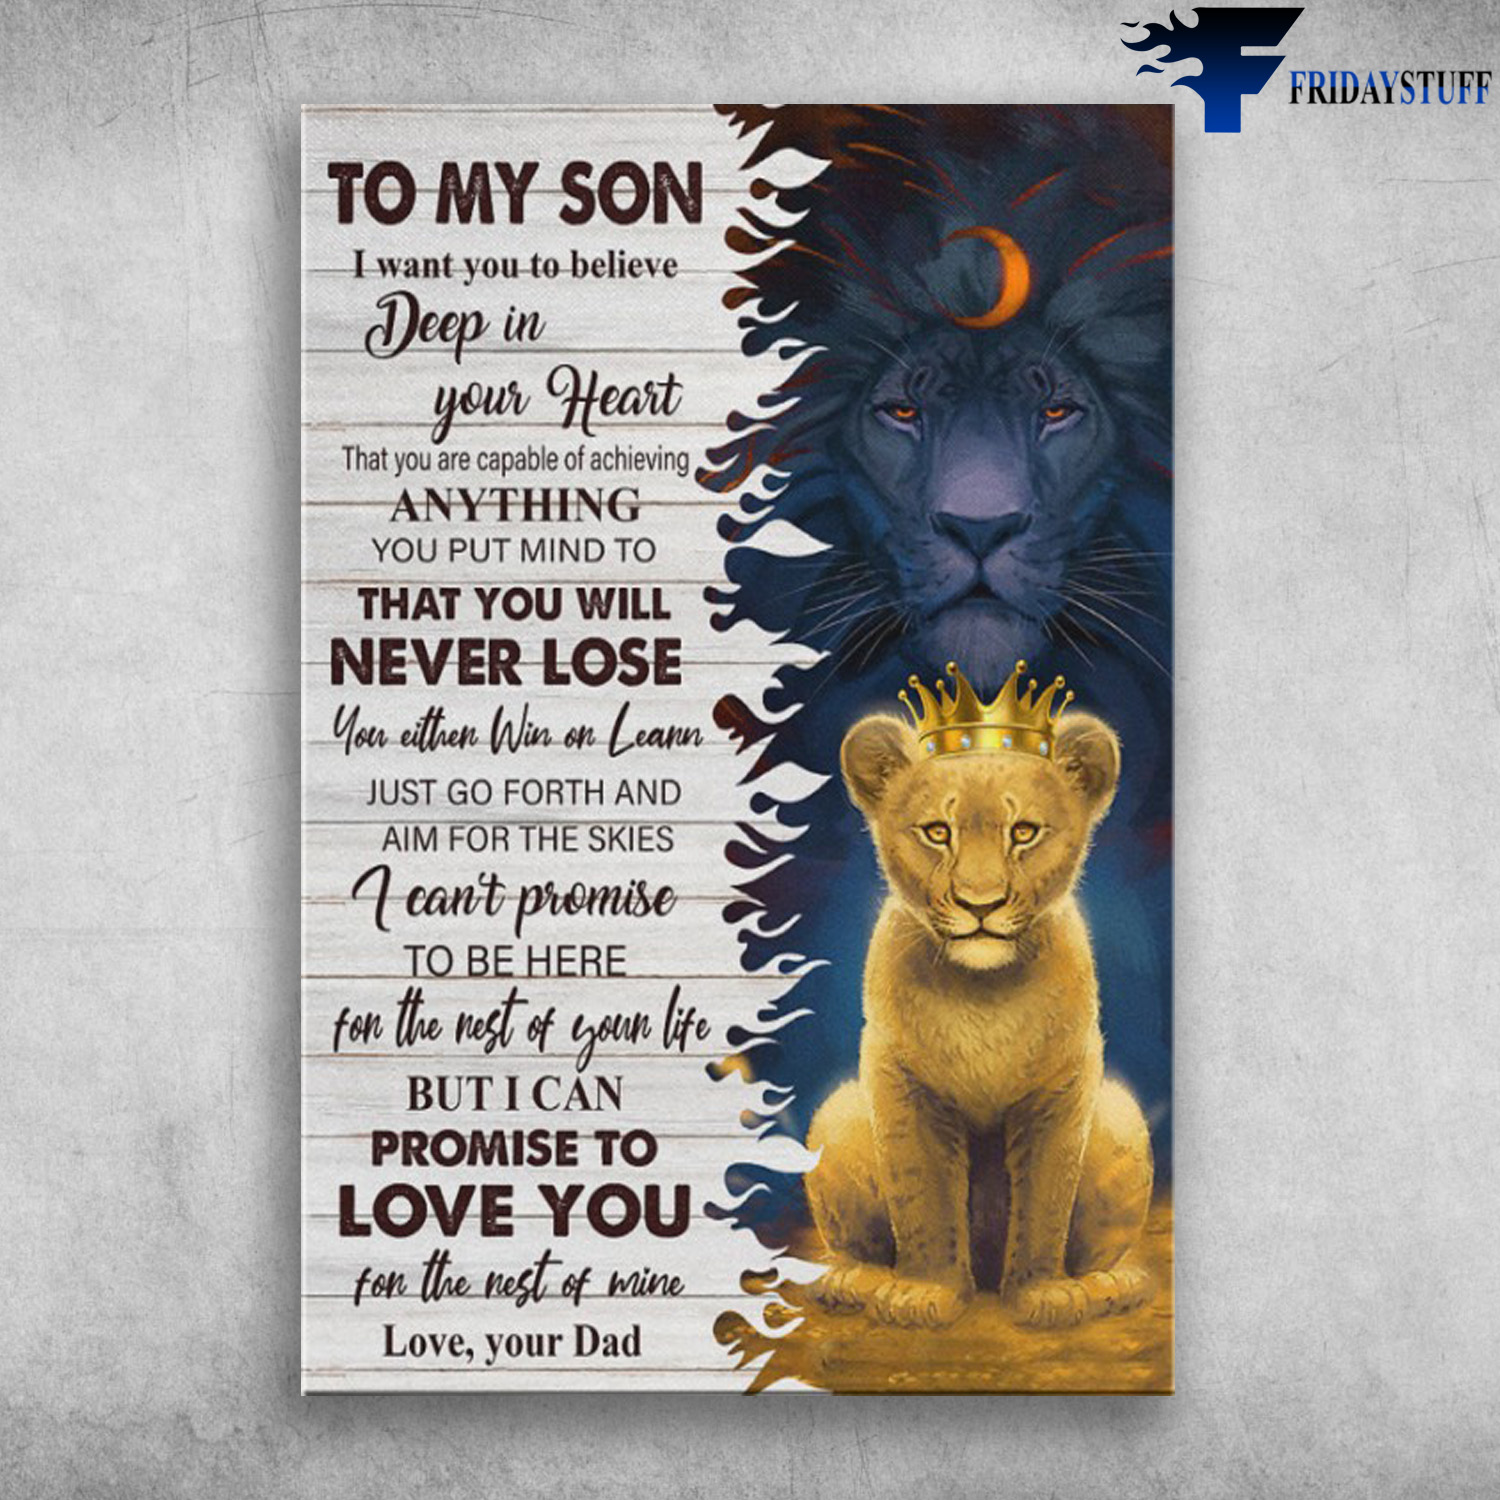 Lion King - To My Son, I Want You To Believe Deep In Your Heart, That You Are Capable Of Achieving Anything You Put Your Mind To, That You Will Never Lose, You Either Win Or Learn, Just Go Forth And Aim For The Skies